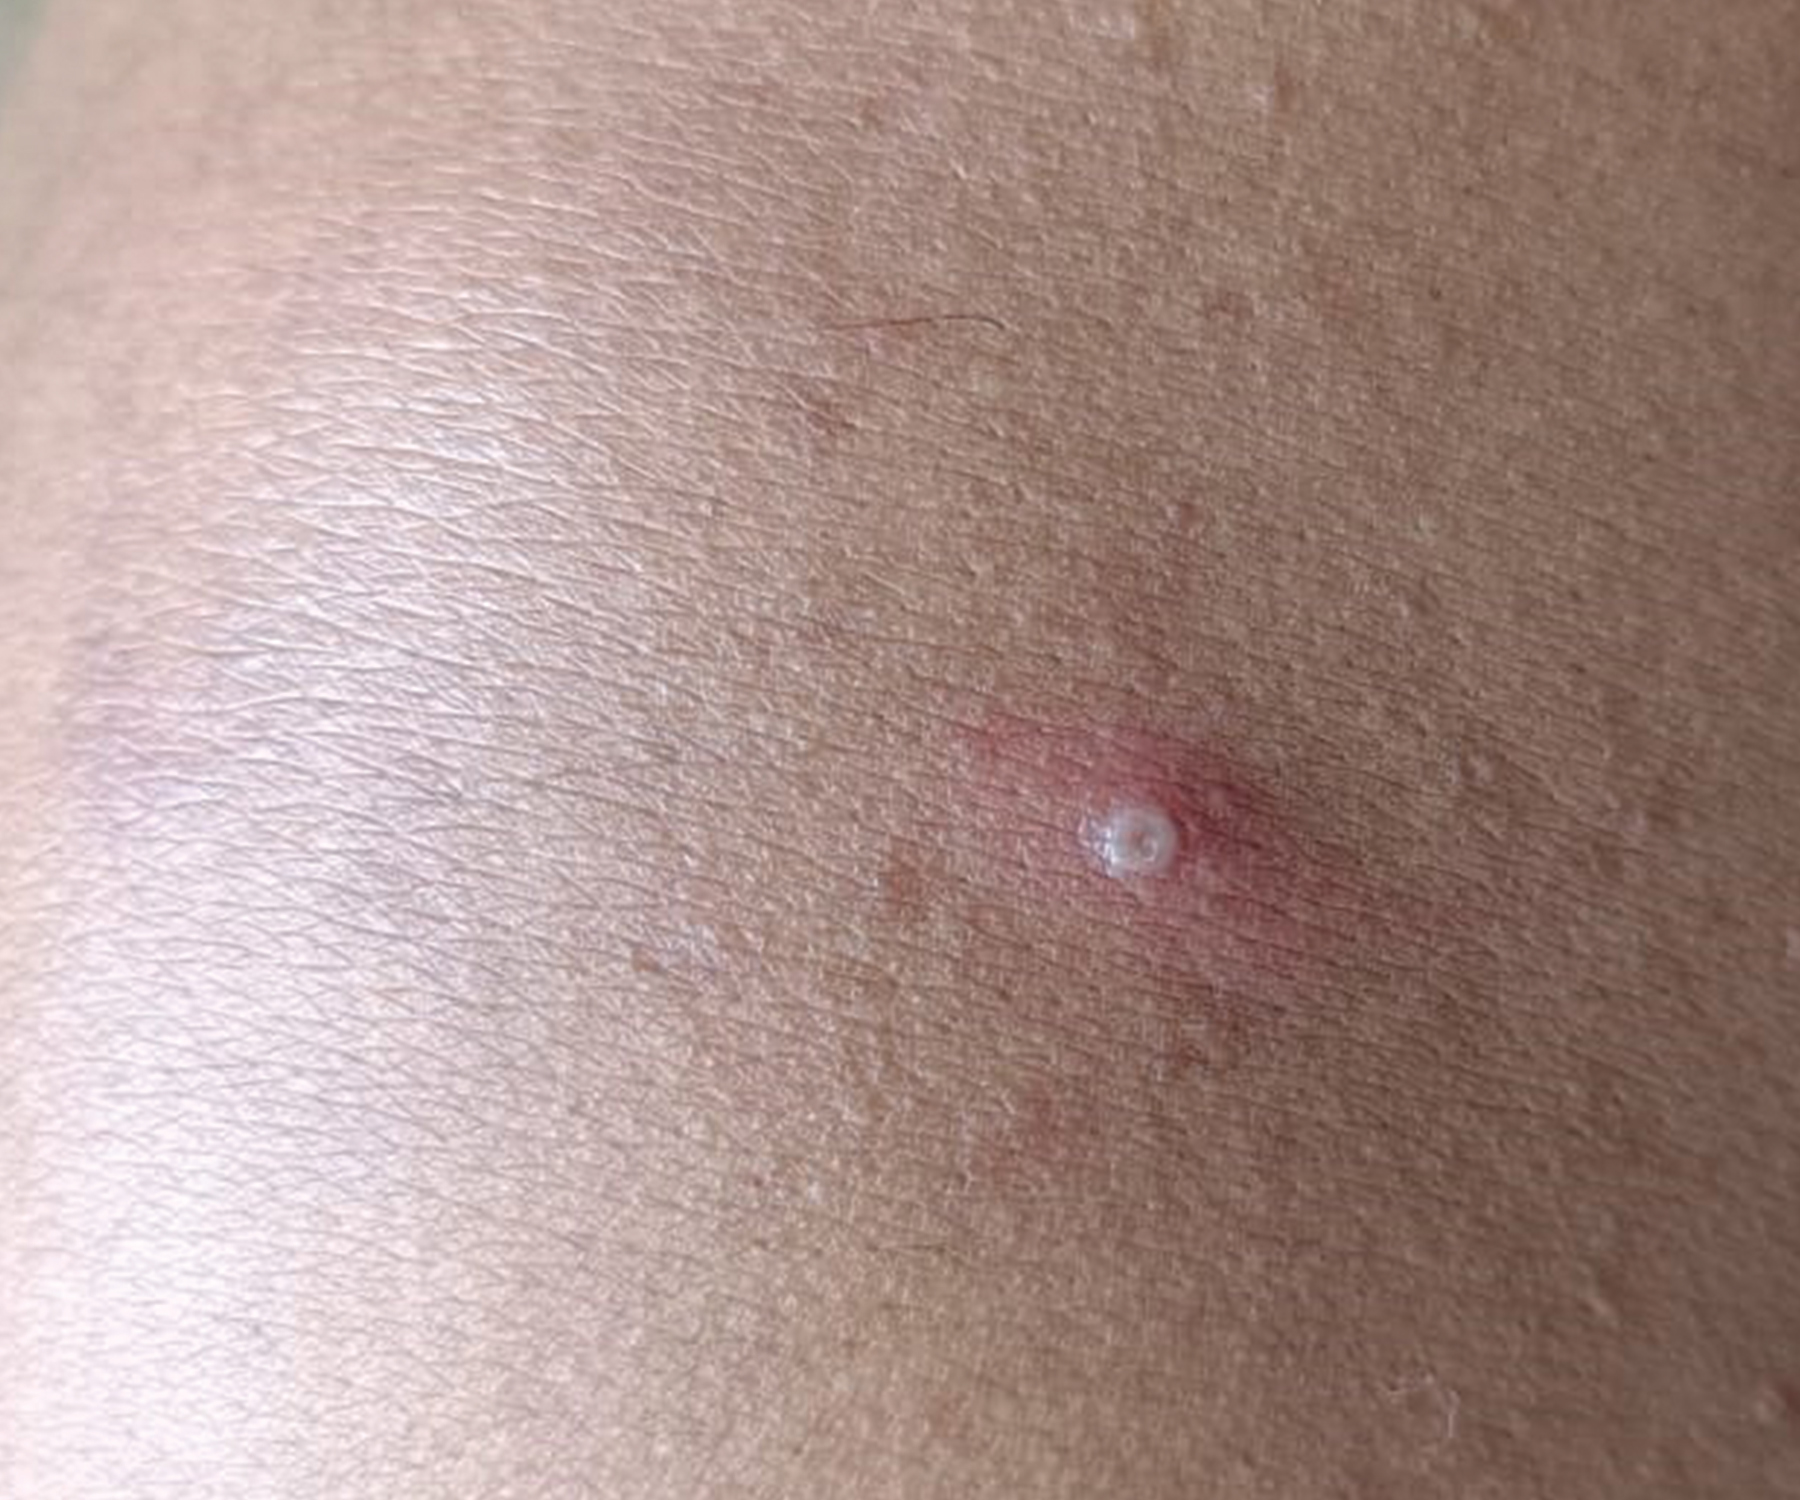 Monkeypox. Day-10. Pustule on shoulder with central umbilication